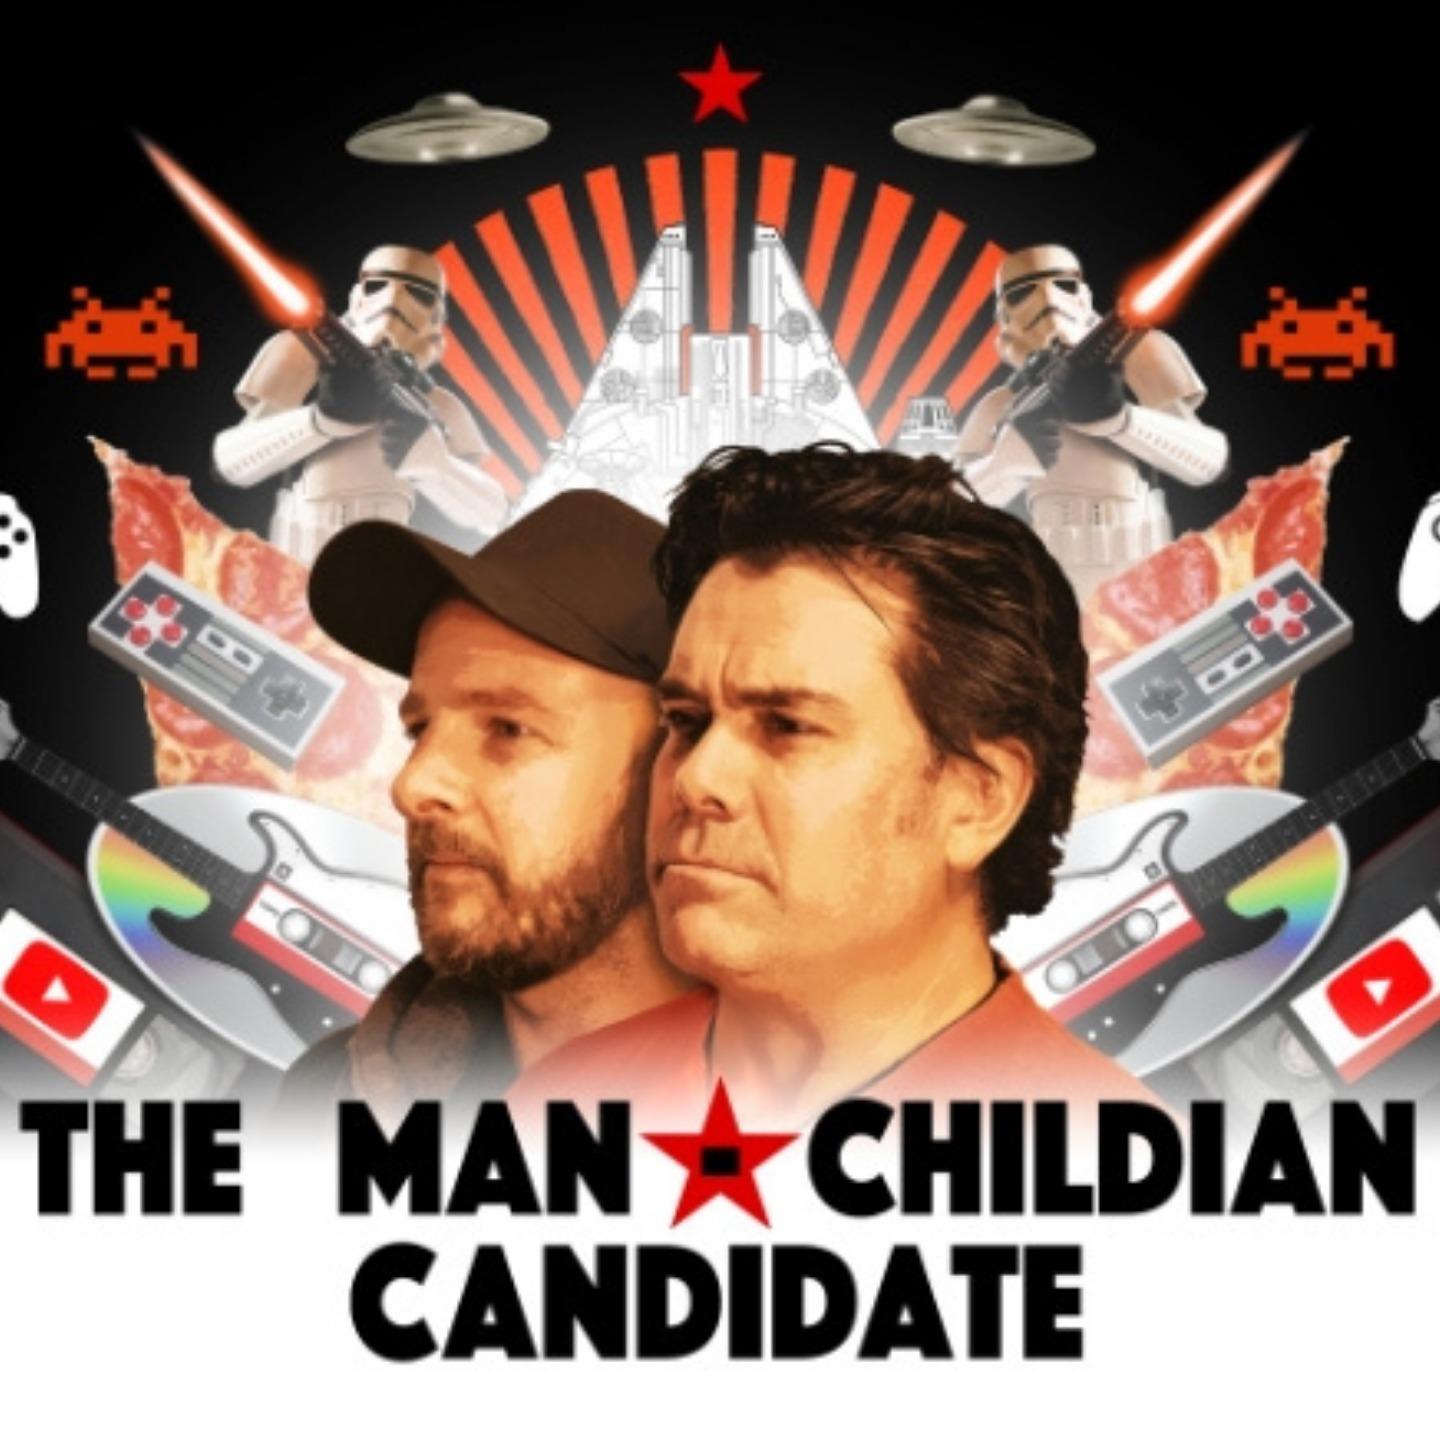 The Man-Childian Candidate